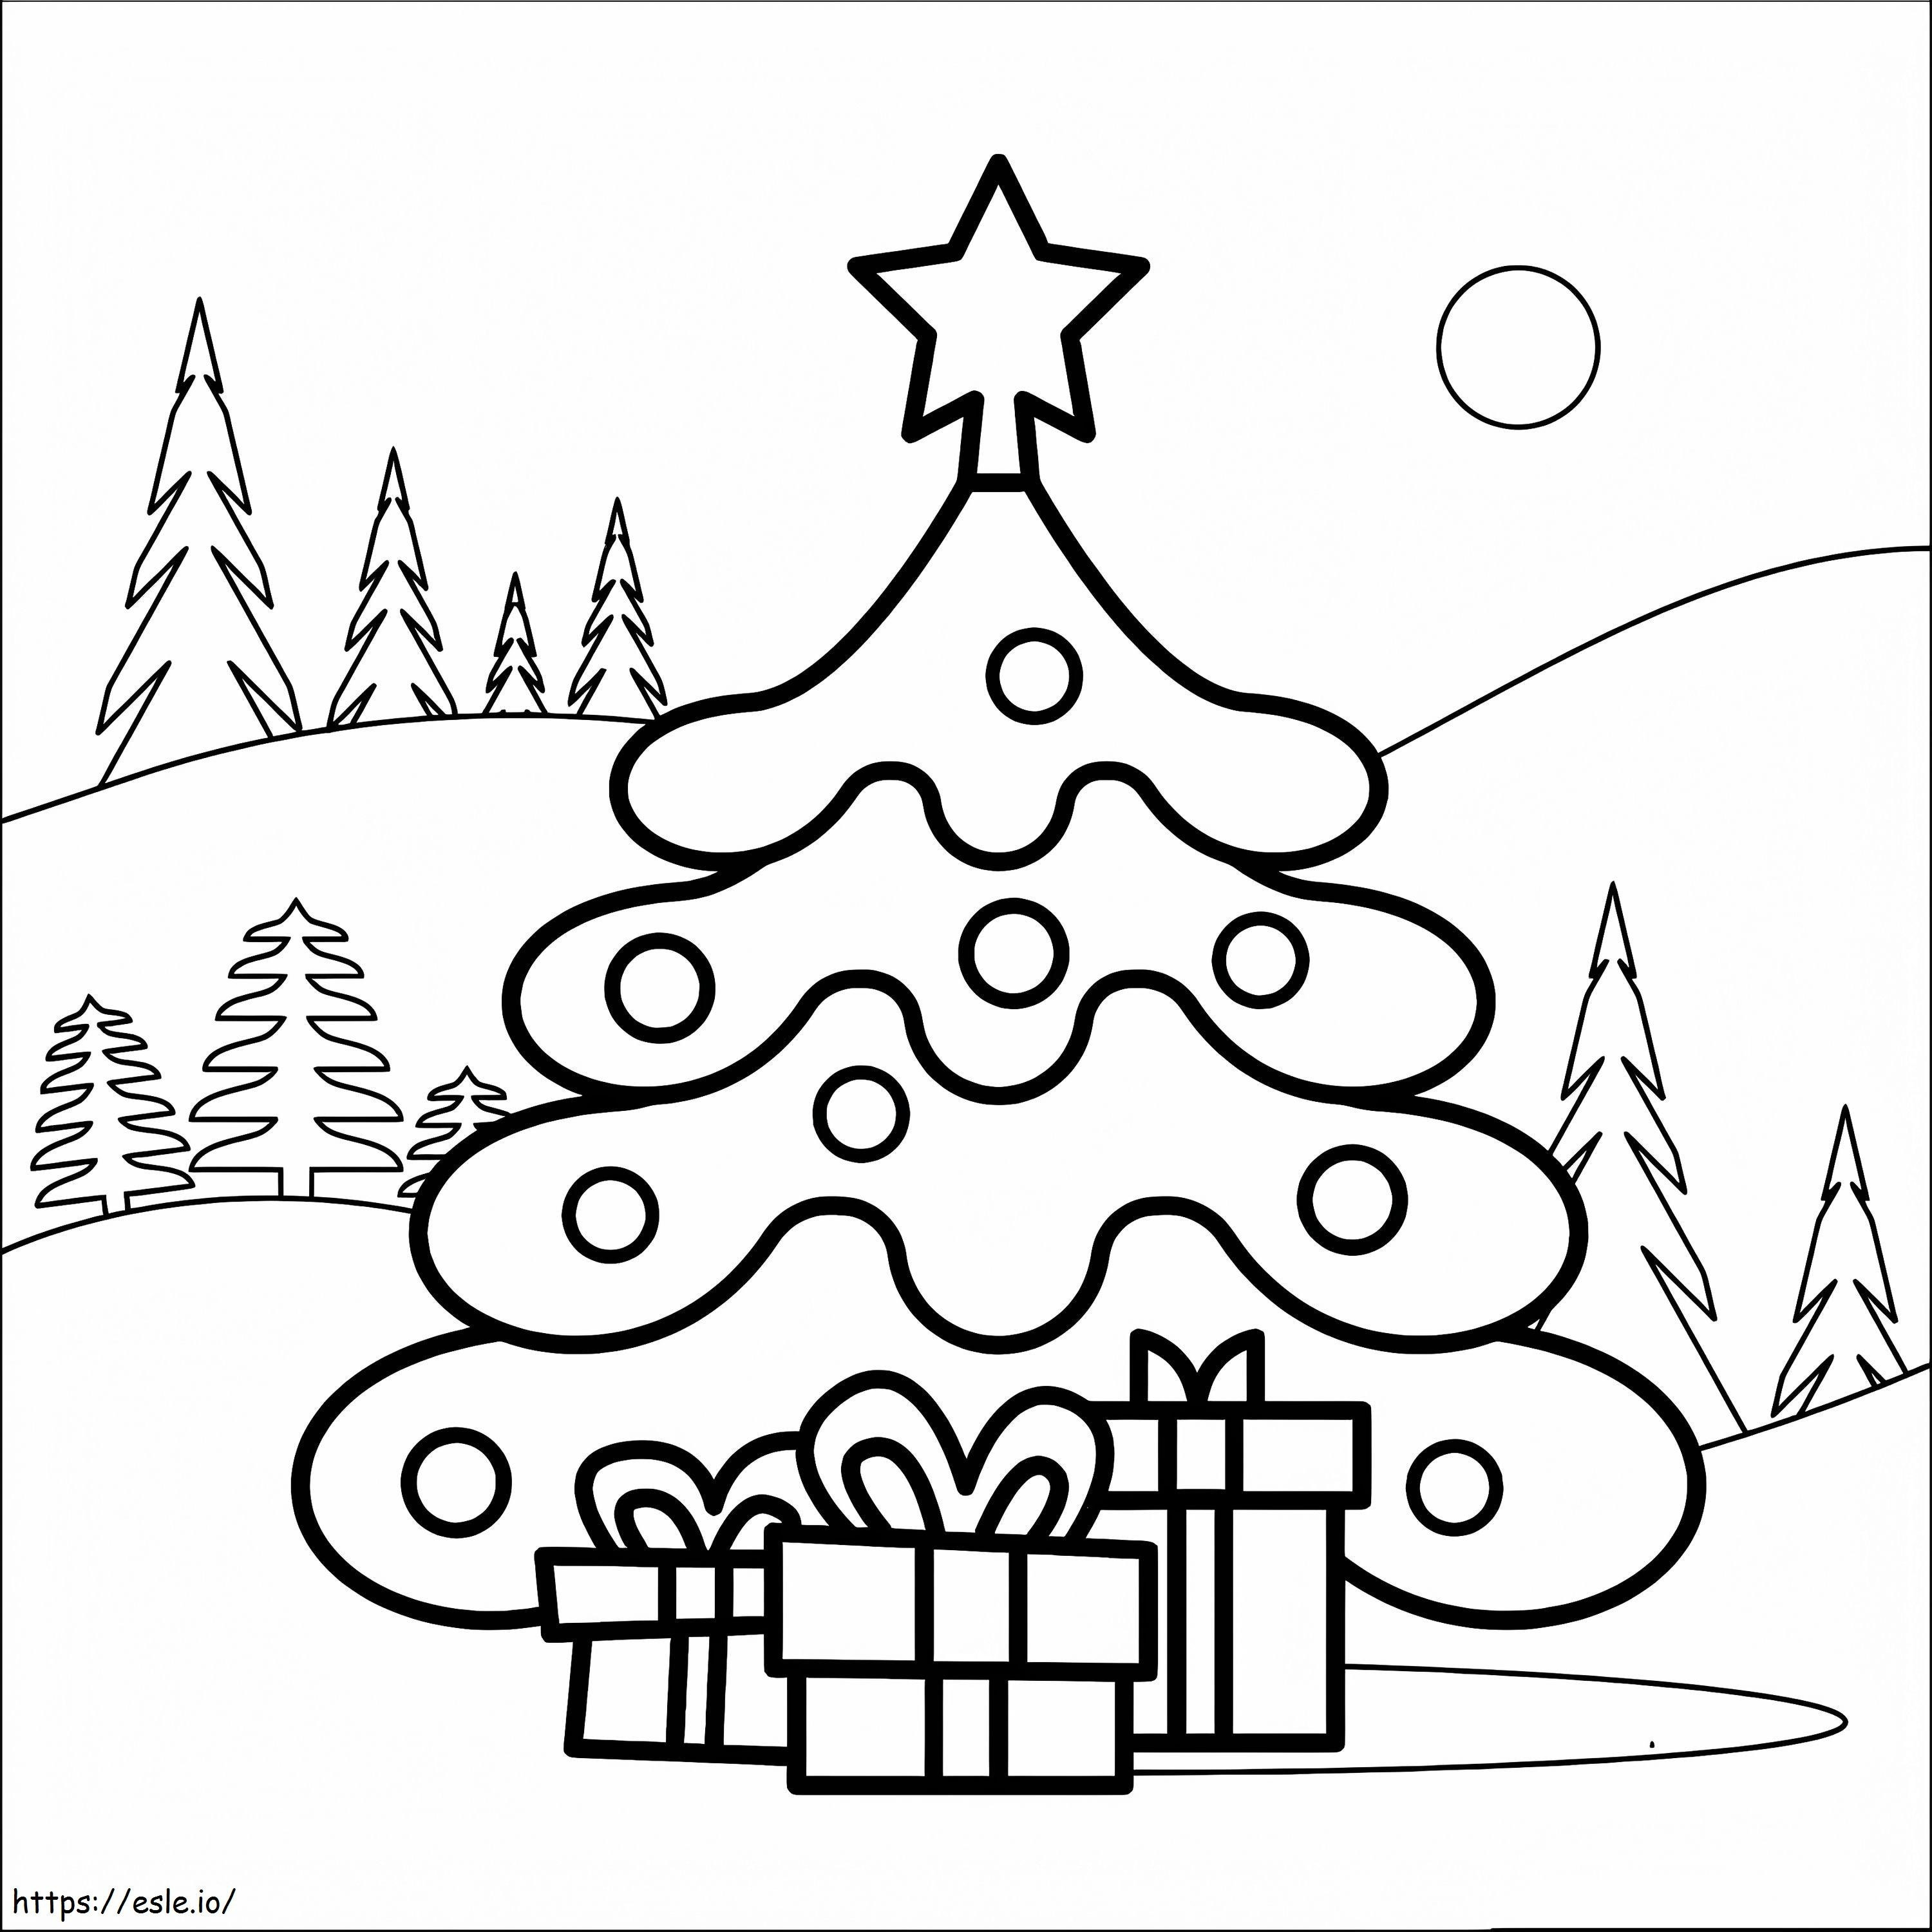 Christmas Tree And Gifts 3 coloring page